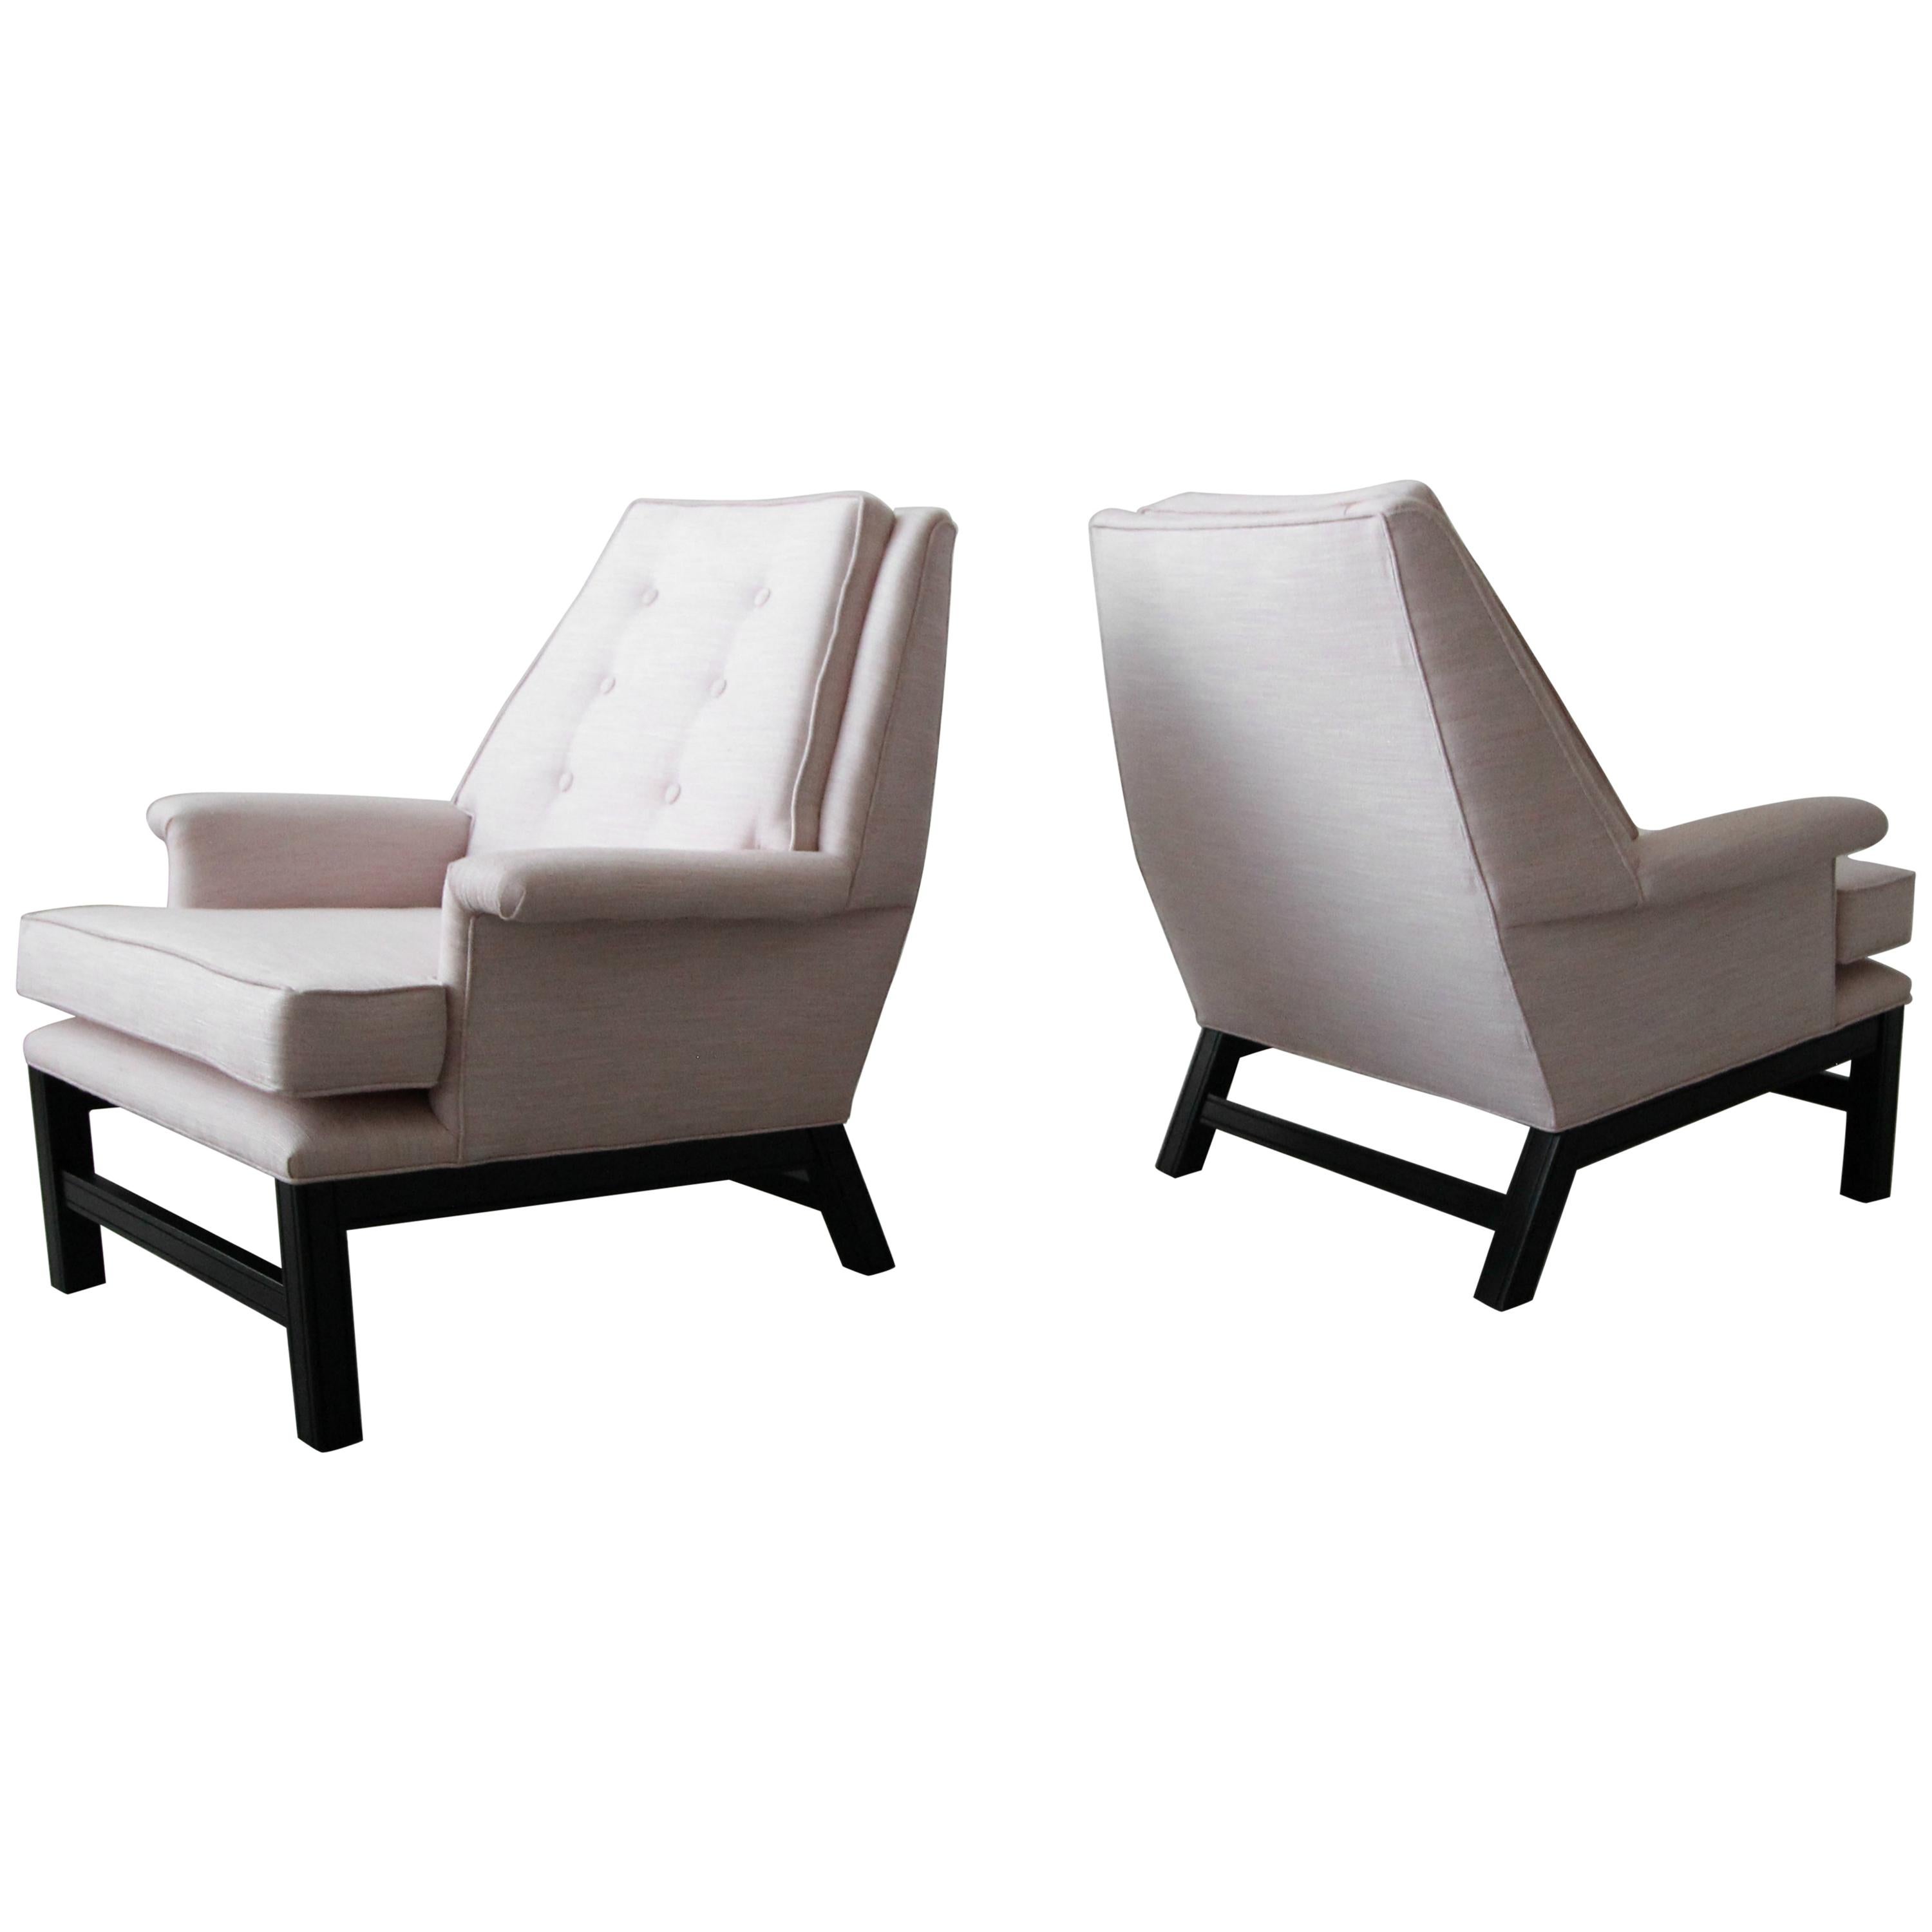 Large Pair of Mid-Century Modern Lounge Chairs